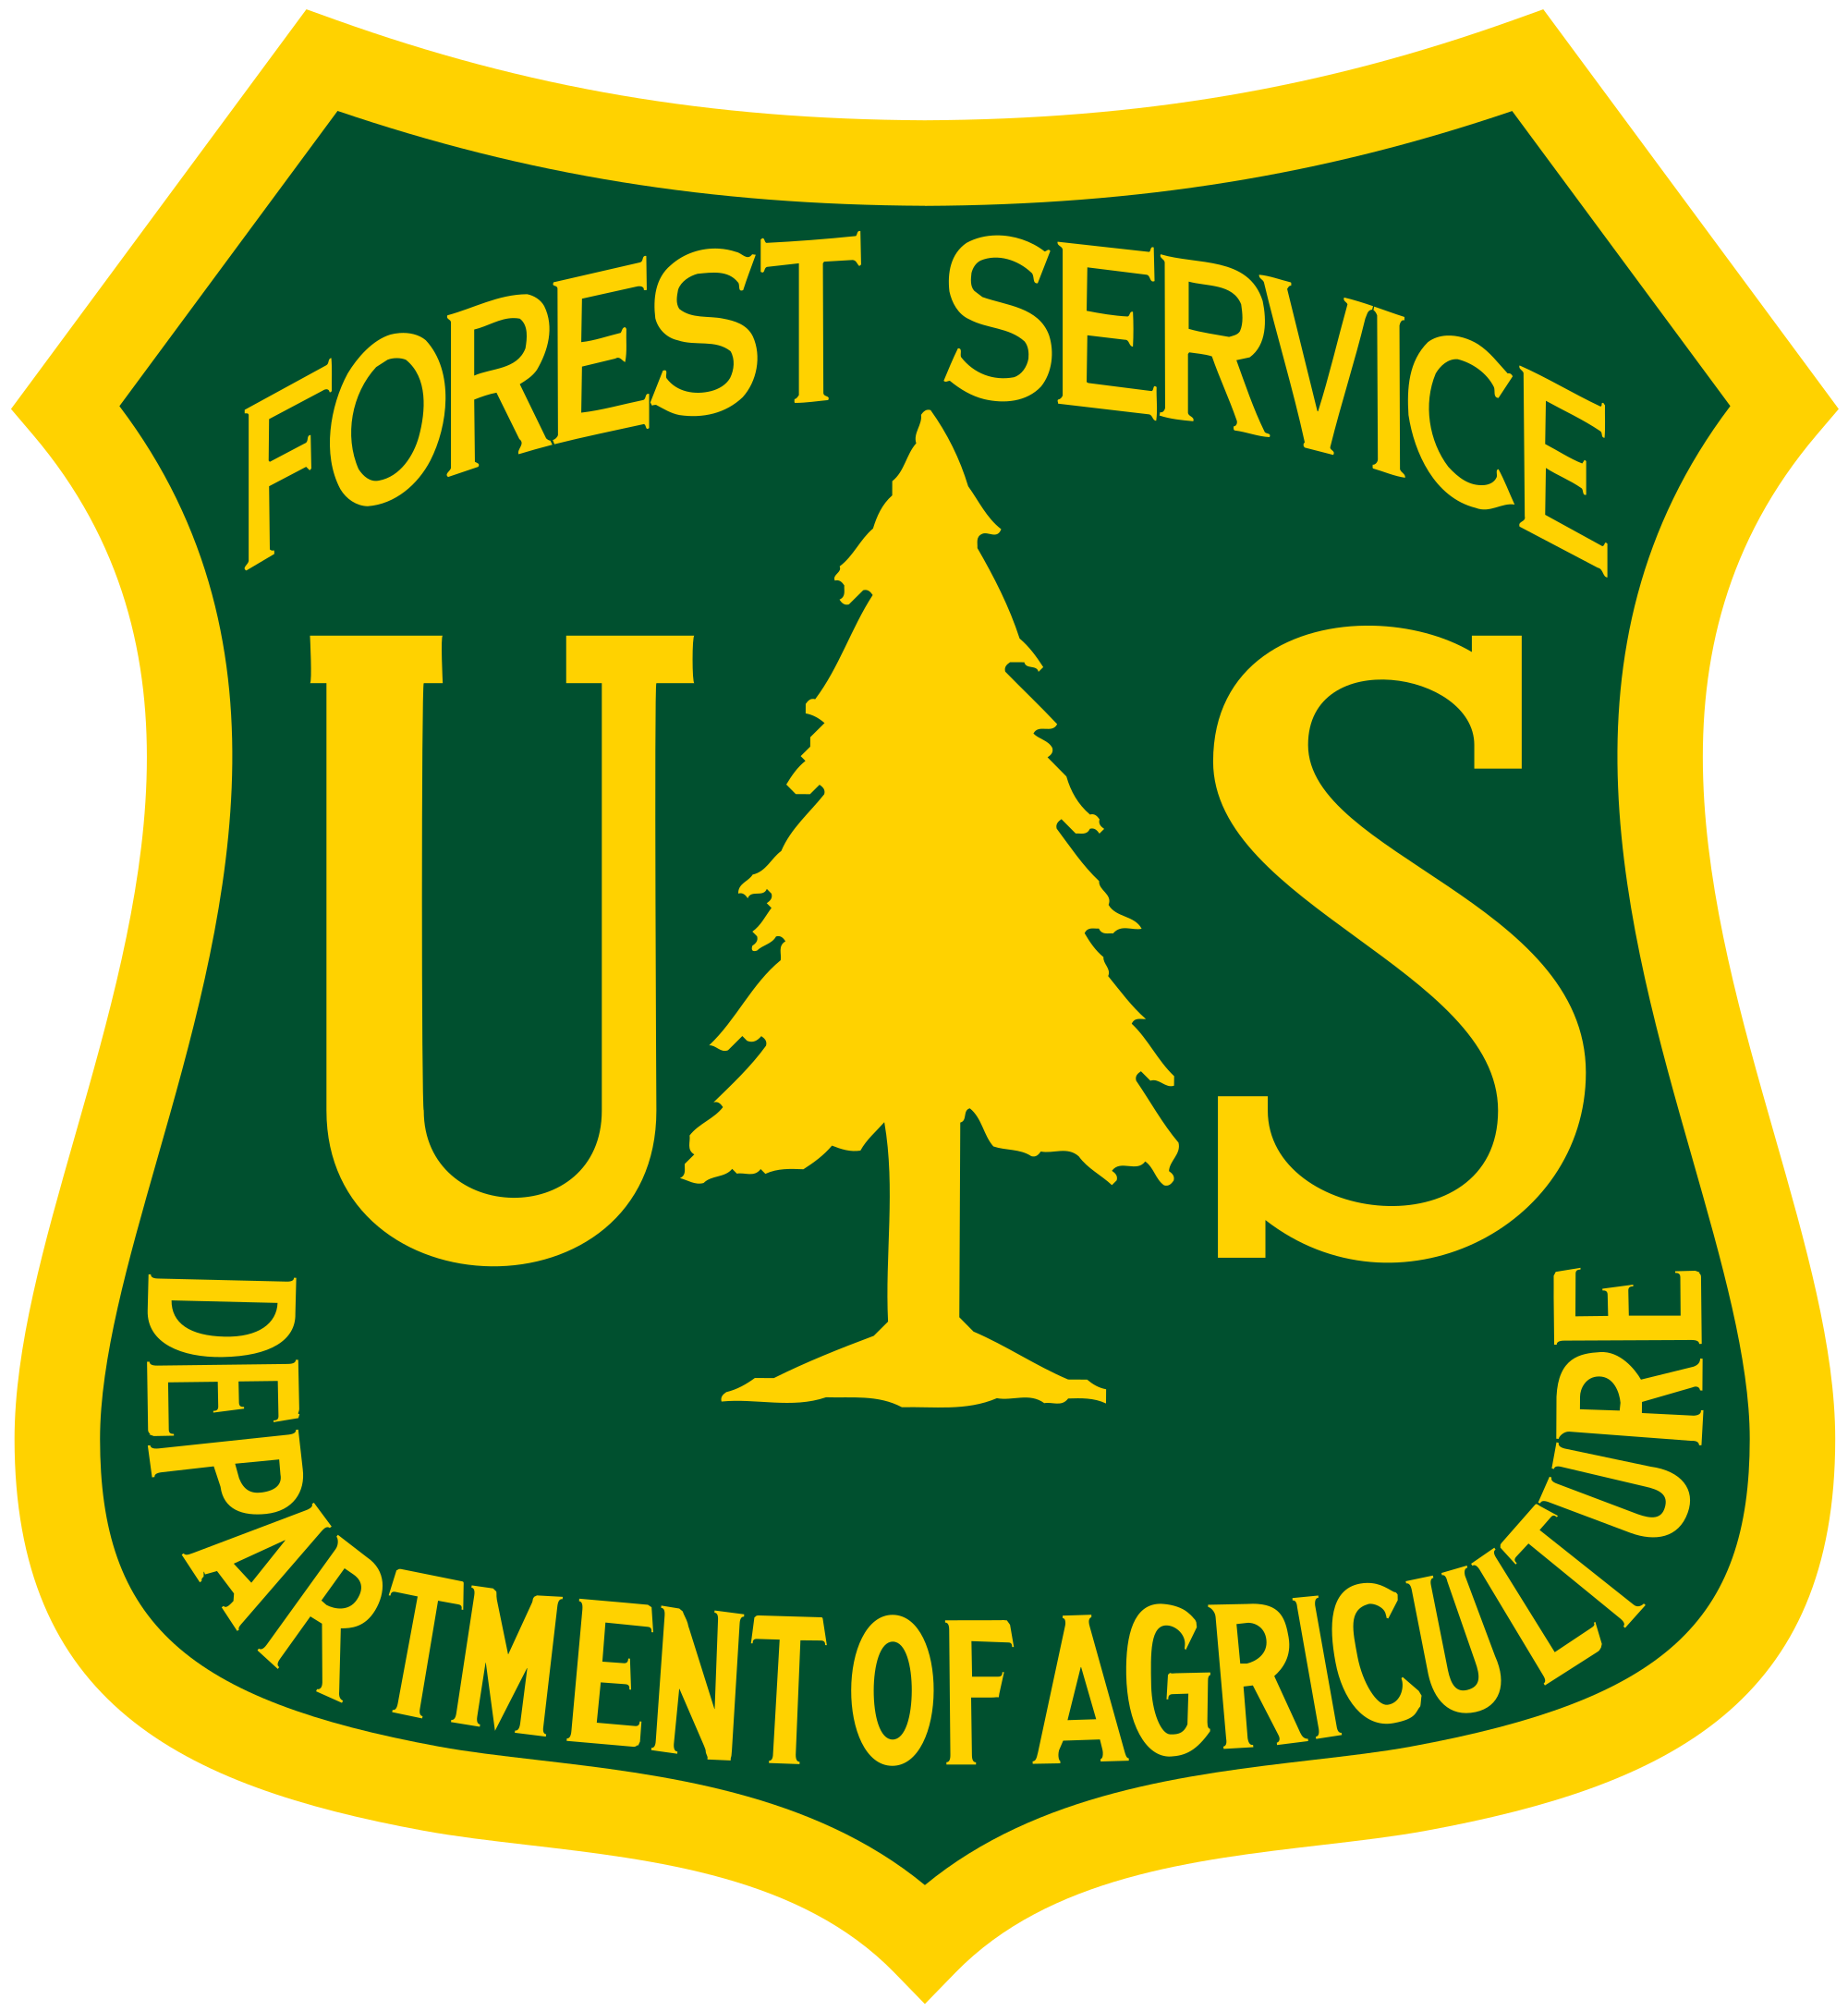 
											U.S. Forest Service